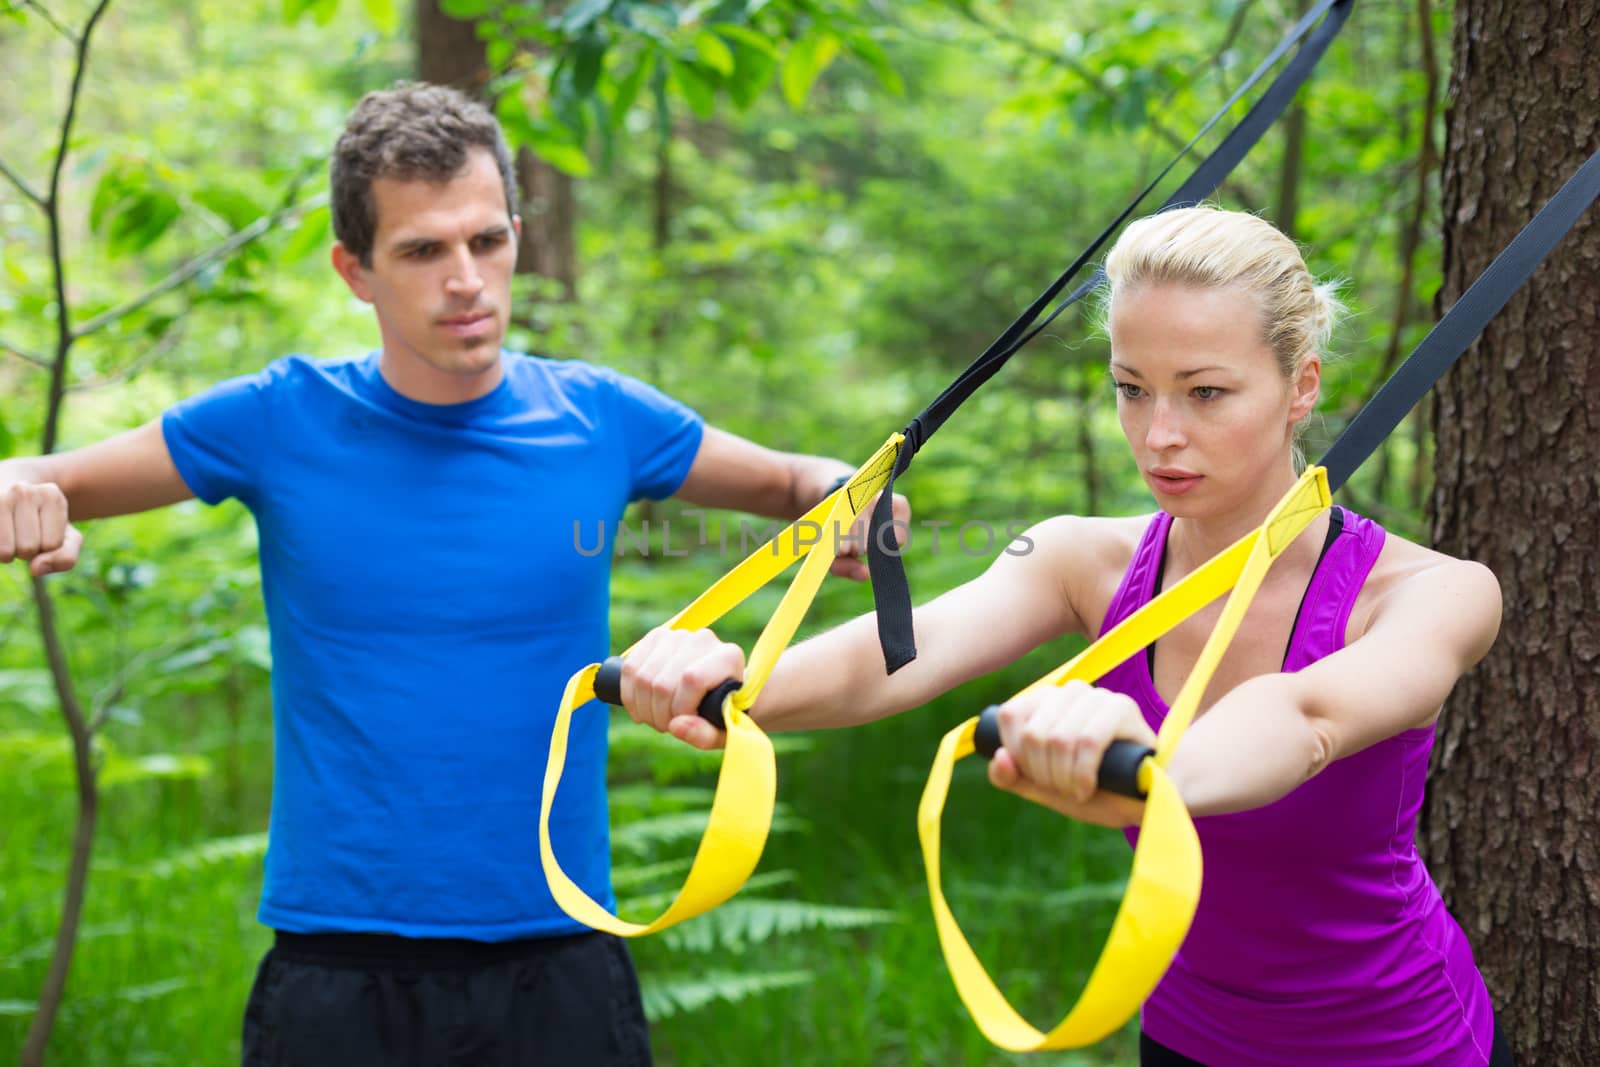 Training with fitness straps outdoors. by kasto